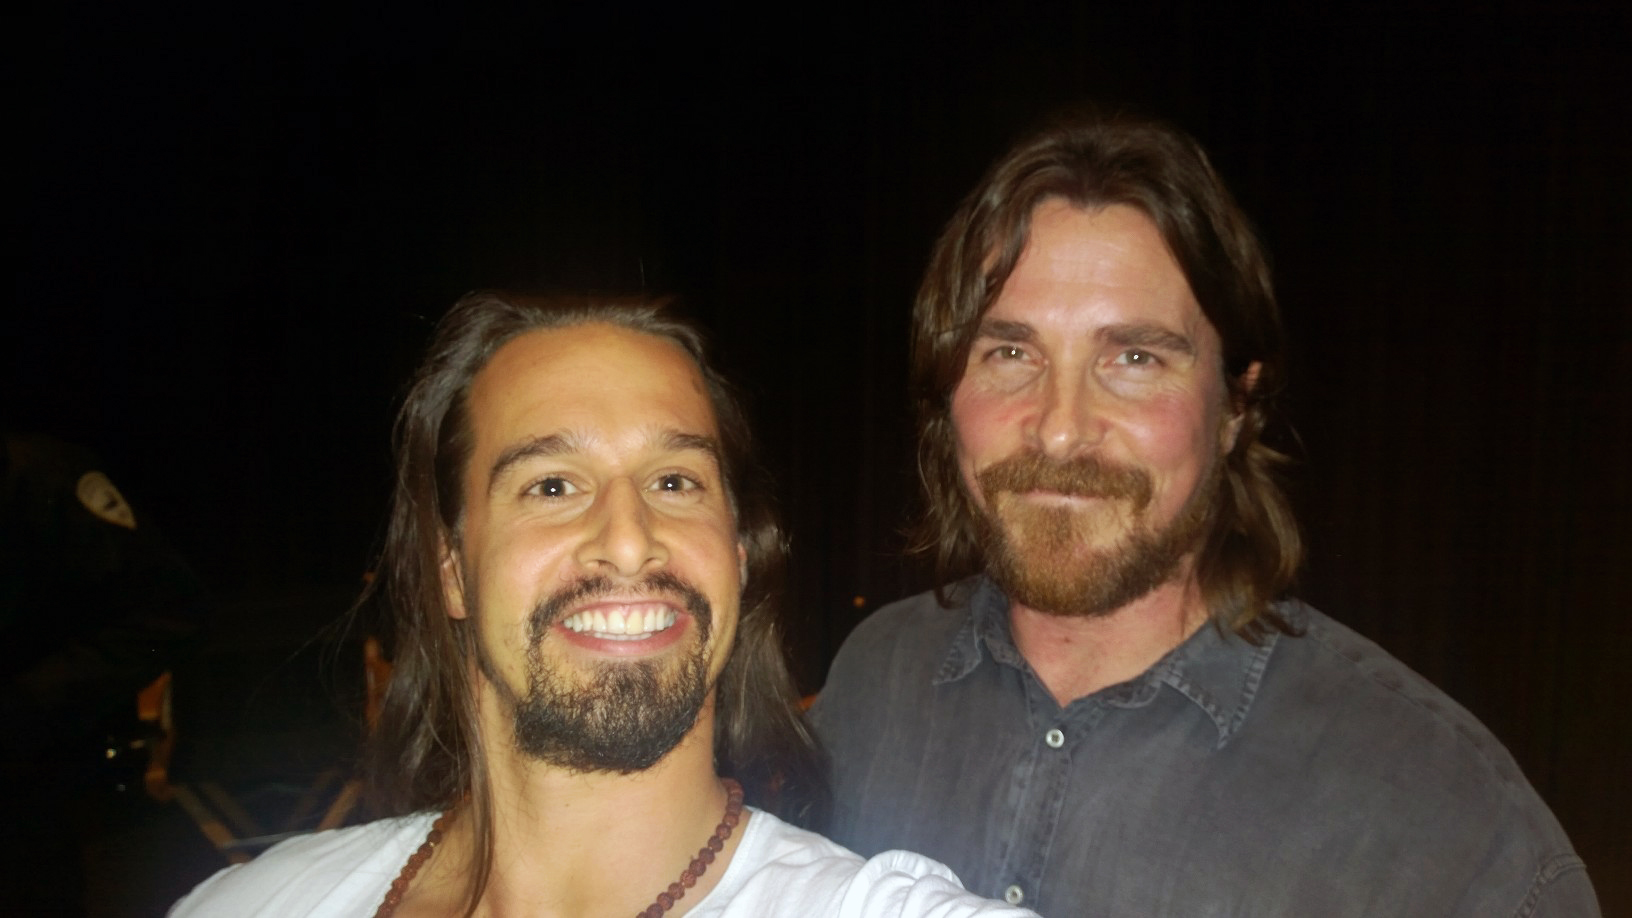 Christian Bale and Sancho Martin at the prescreening of Exodus: Gods and Kings